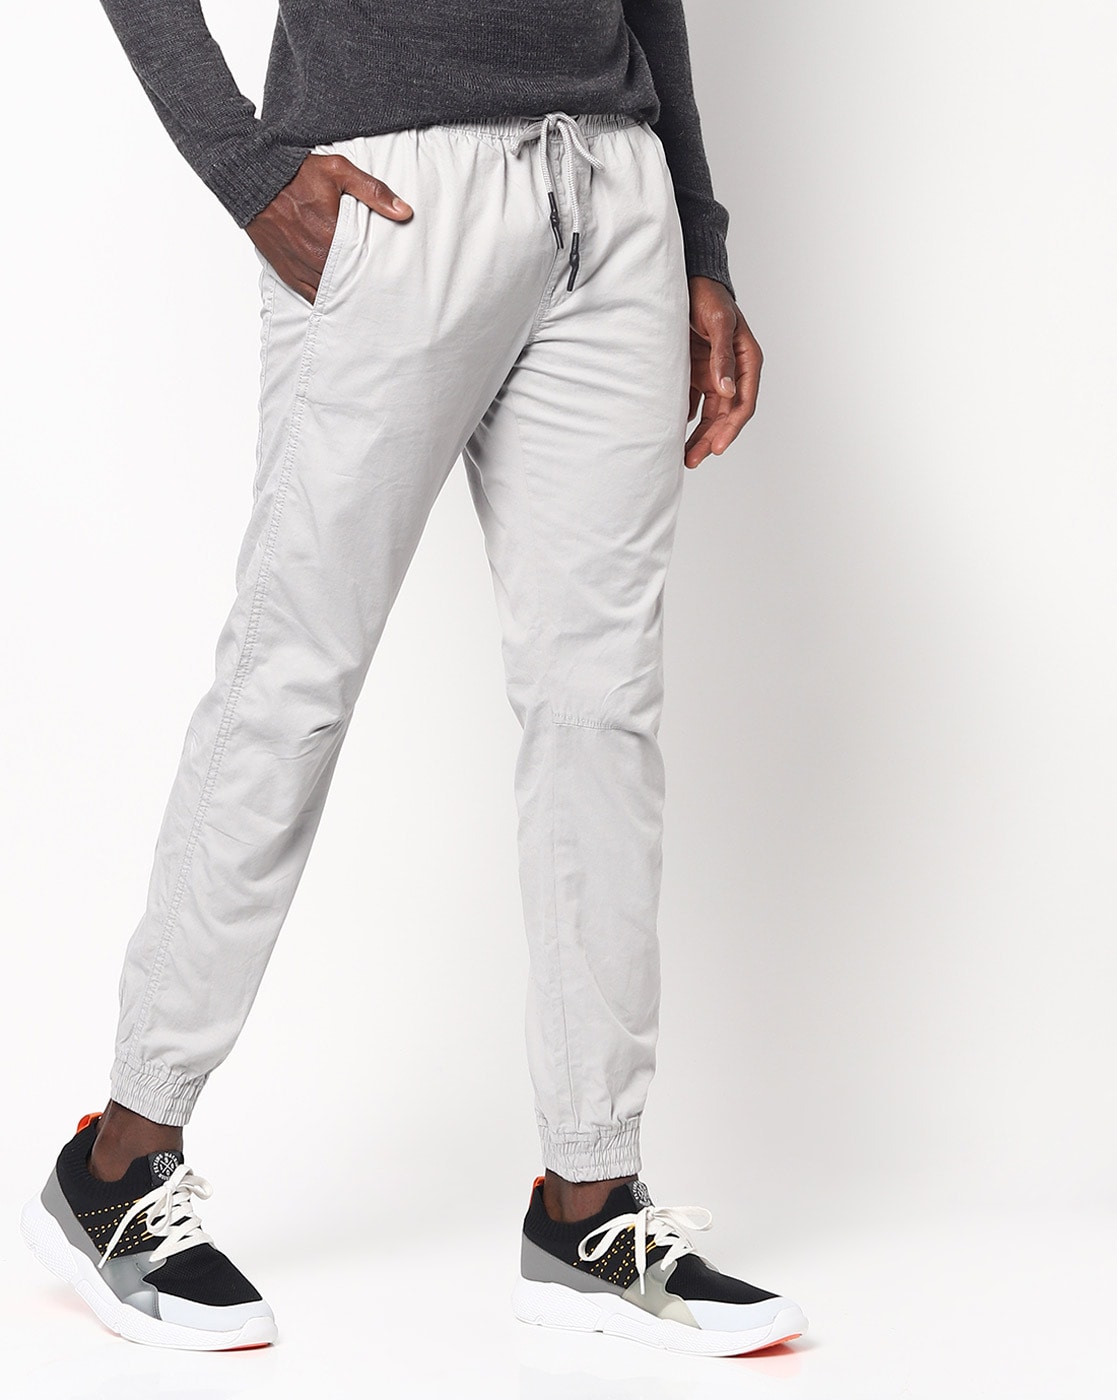 Jeans & Trousers | Ajio DNMX Women Off-white Jeans Stretchable | Freeup